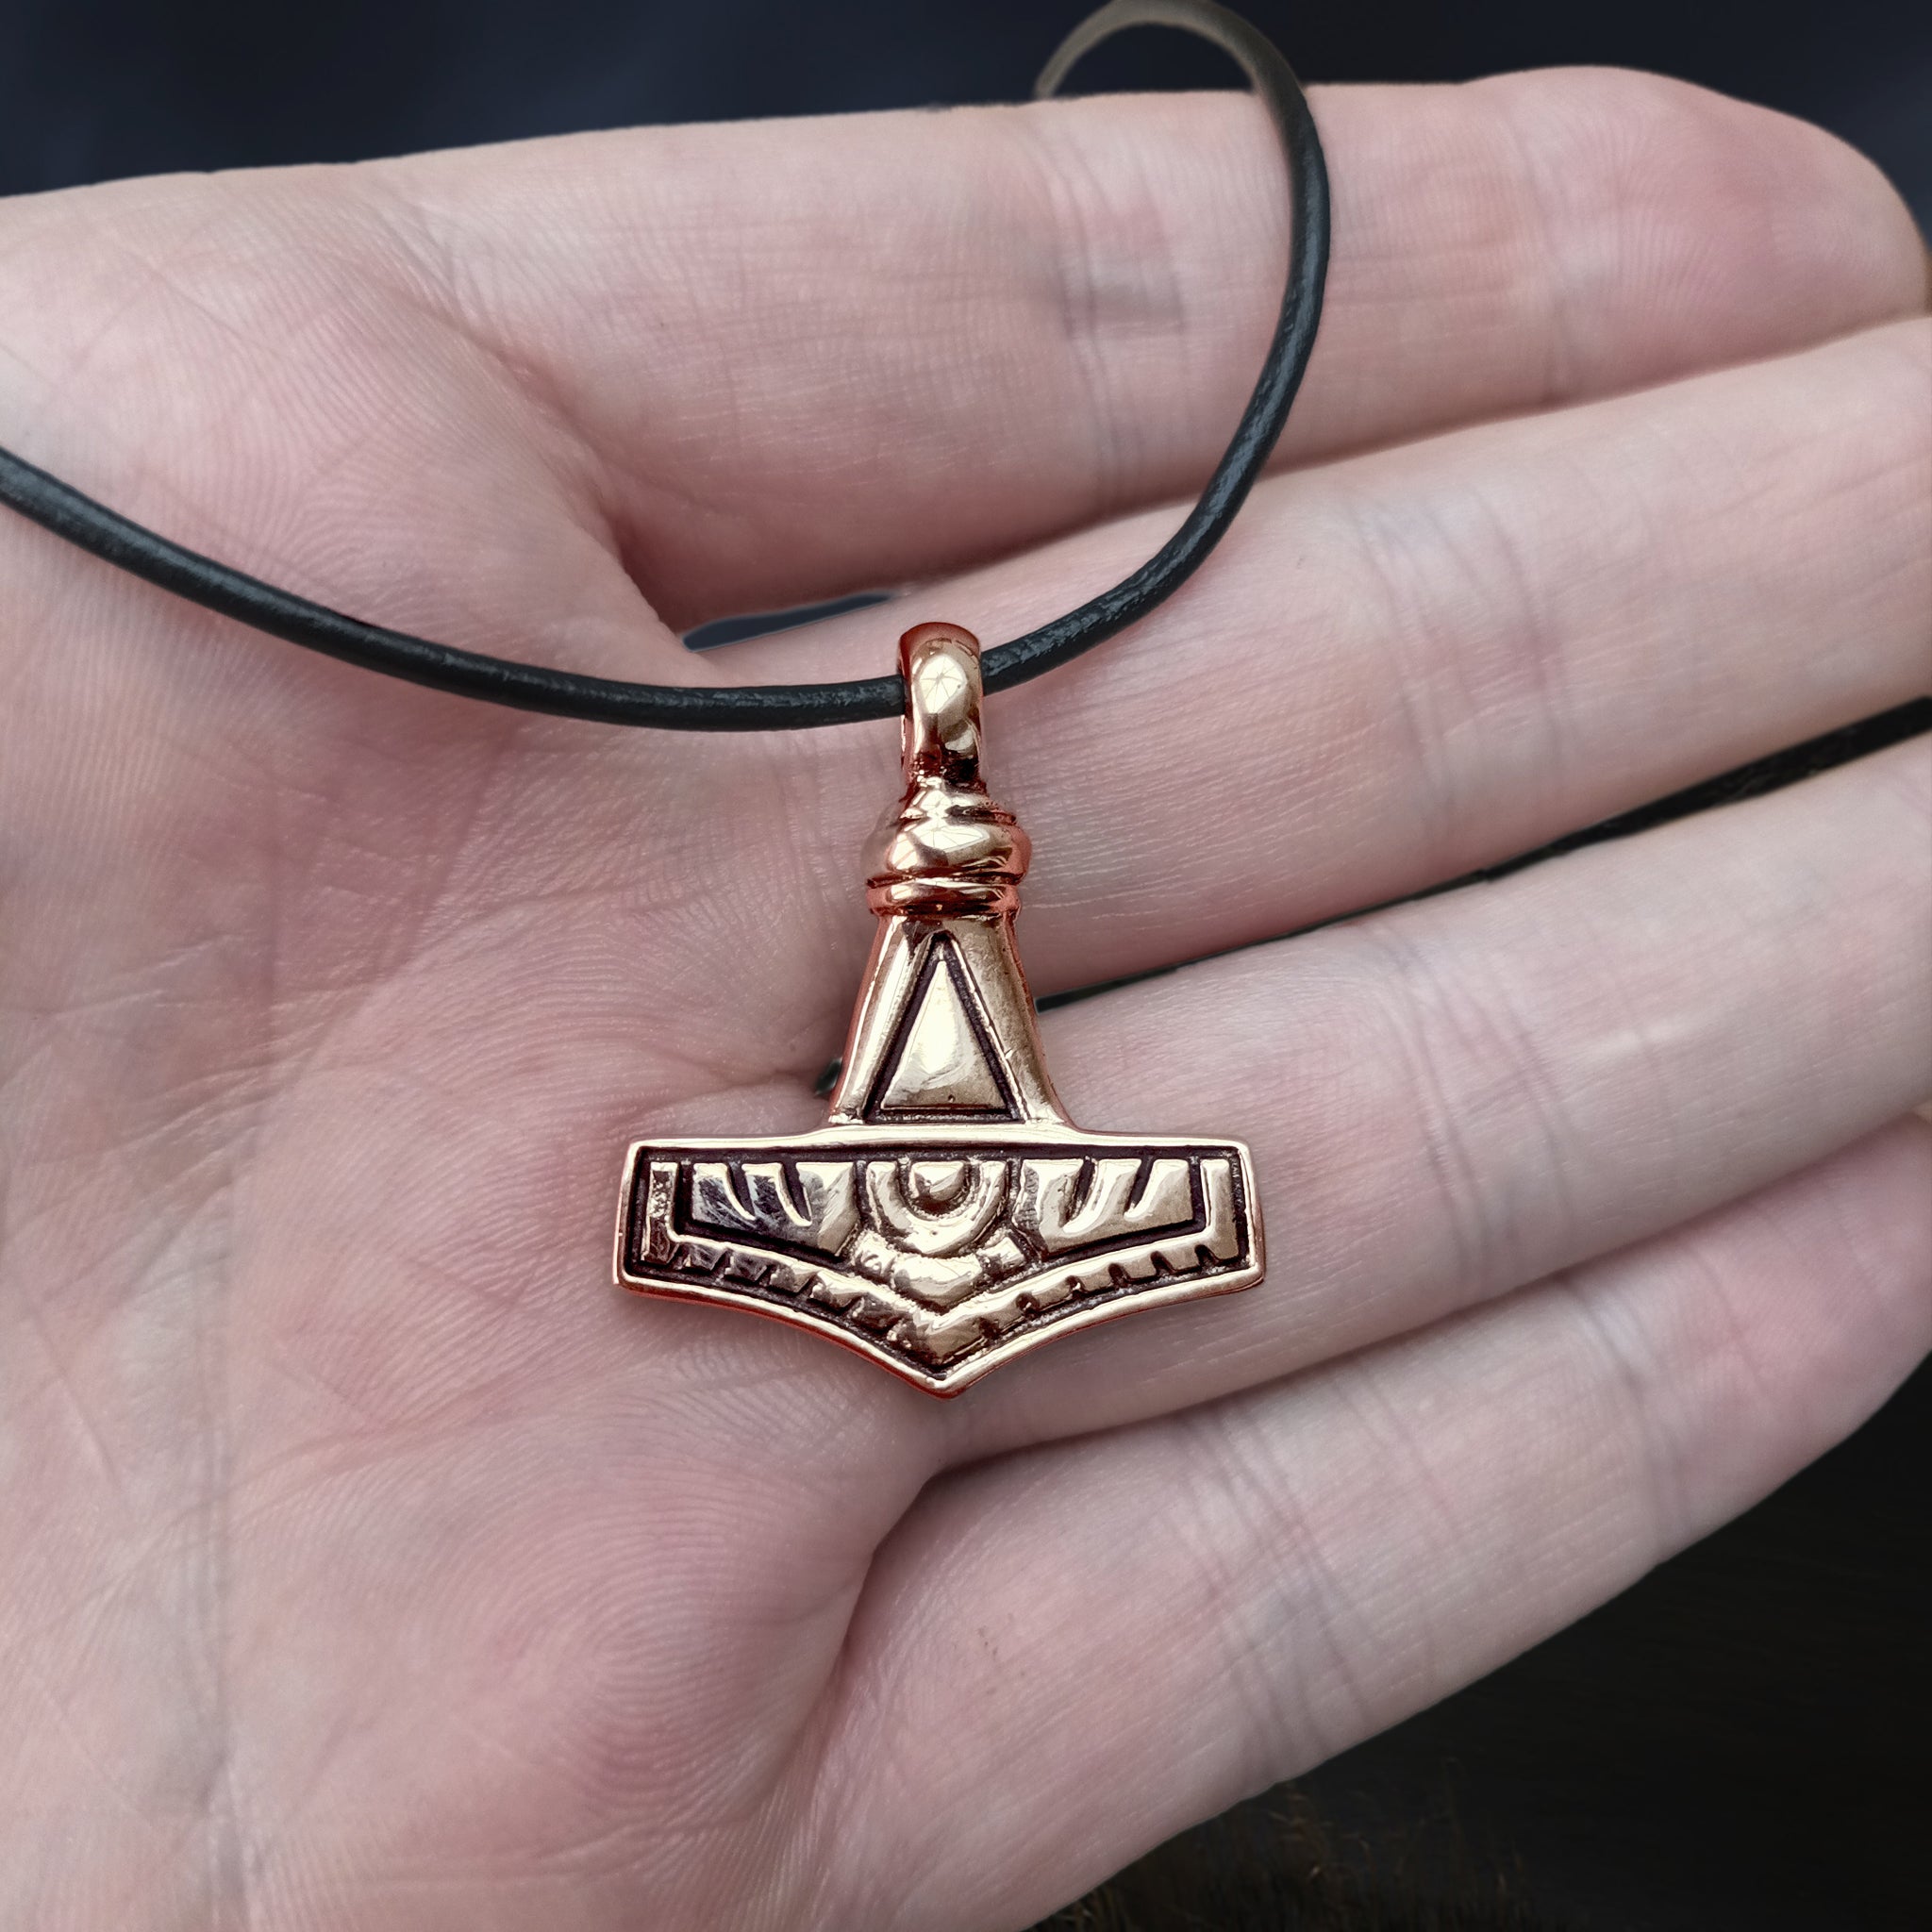 Bronze Gotland Replica Thors Hammer Pendant on Hand on Leather Thong - Front View